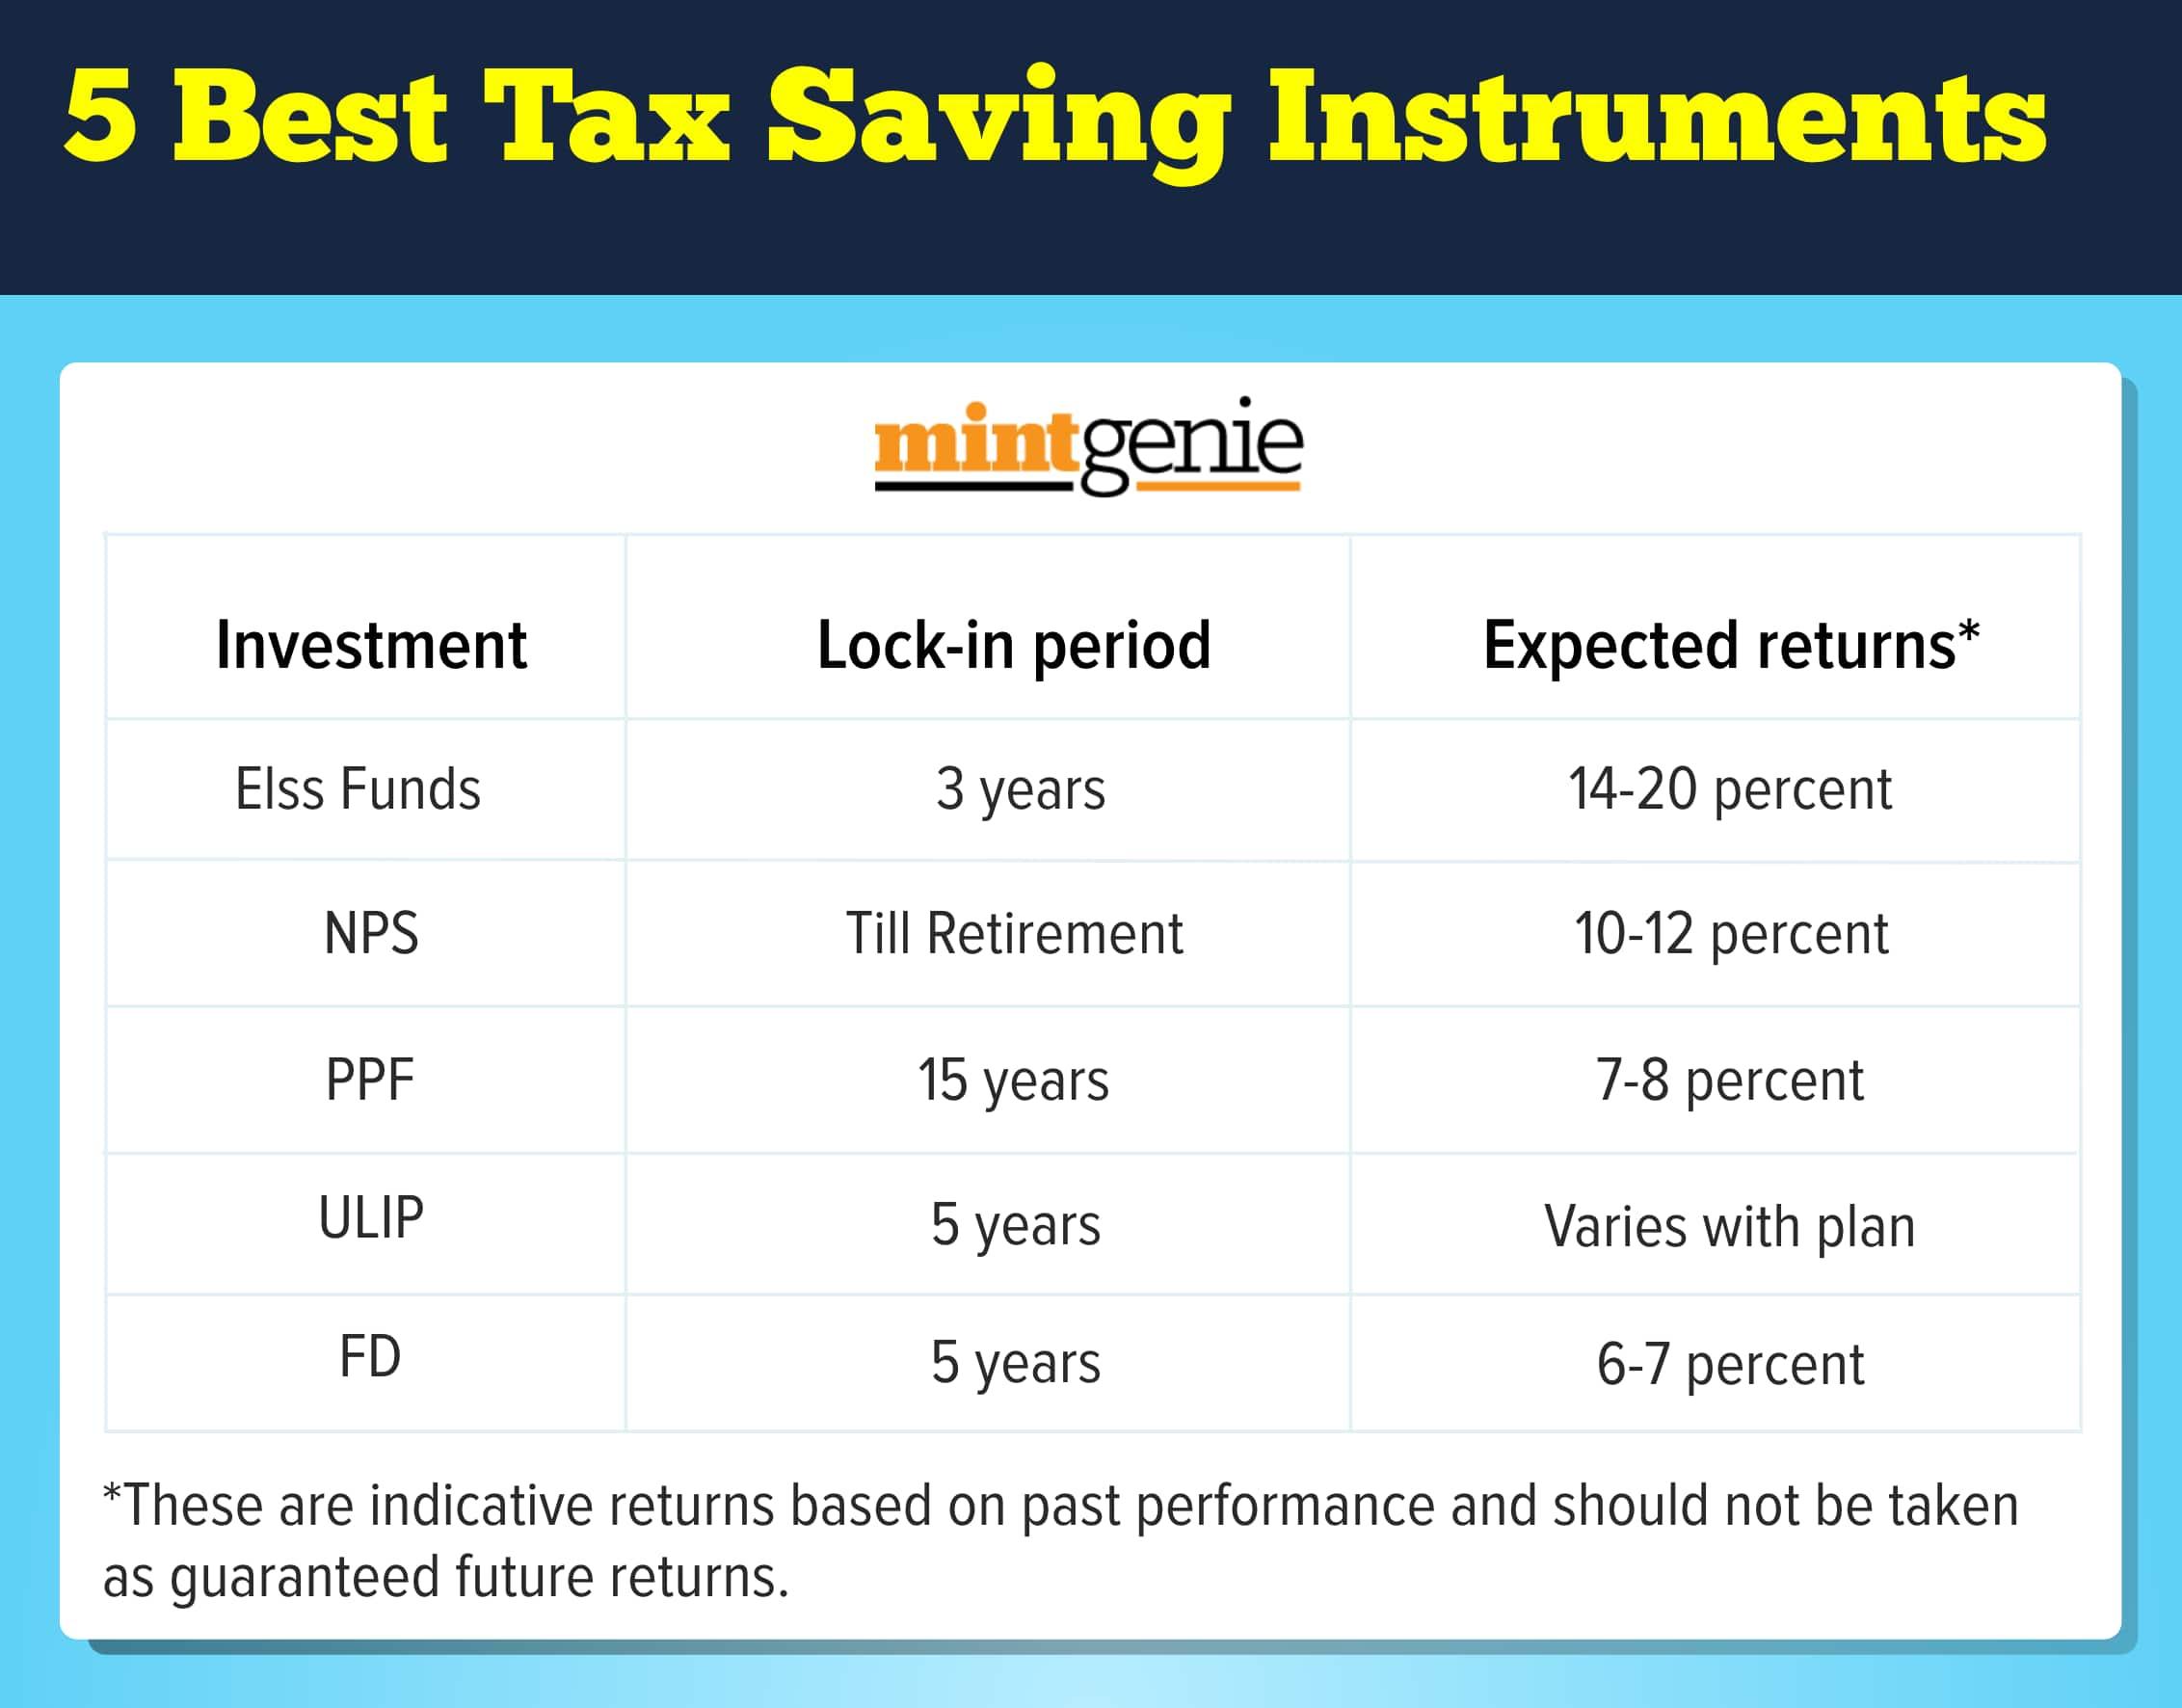 5 best tax saving instruments and their returns